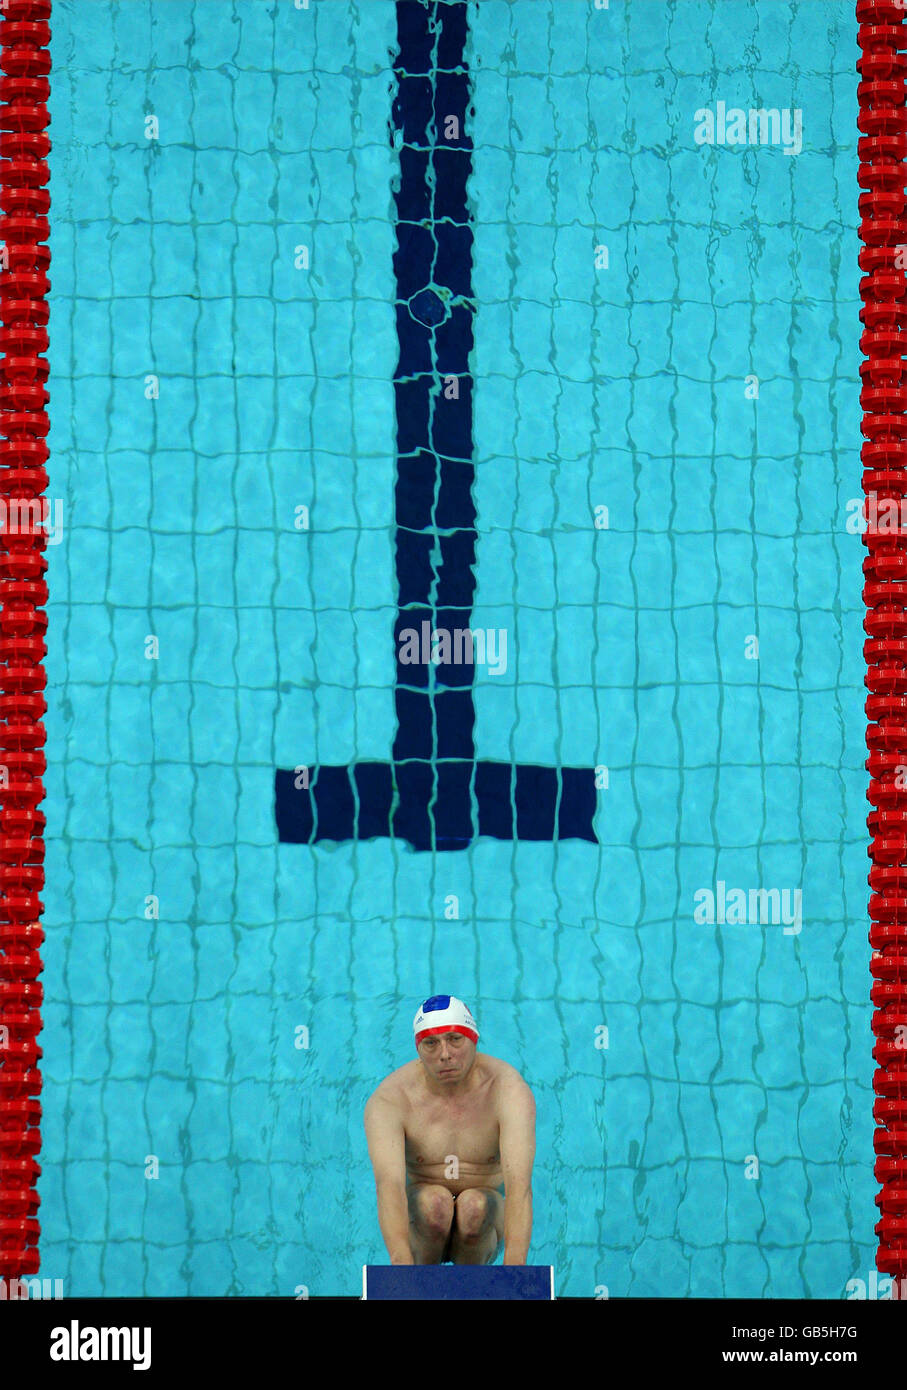 Competitors during Men's 50M Final S2 in the National Acquatic Centre, Beijing. Stock Photo